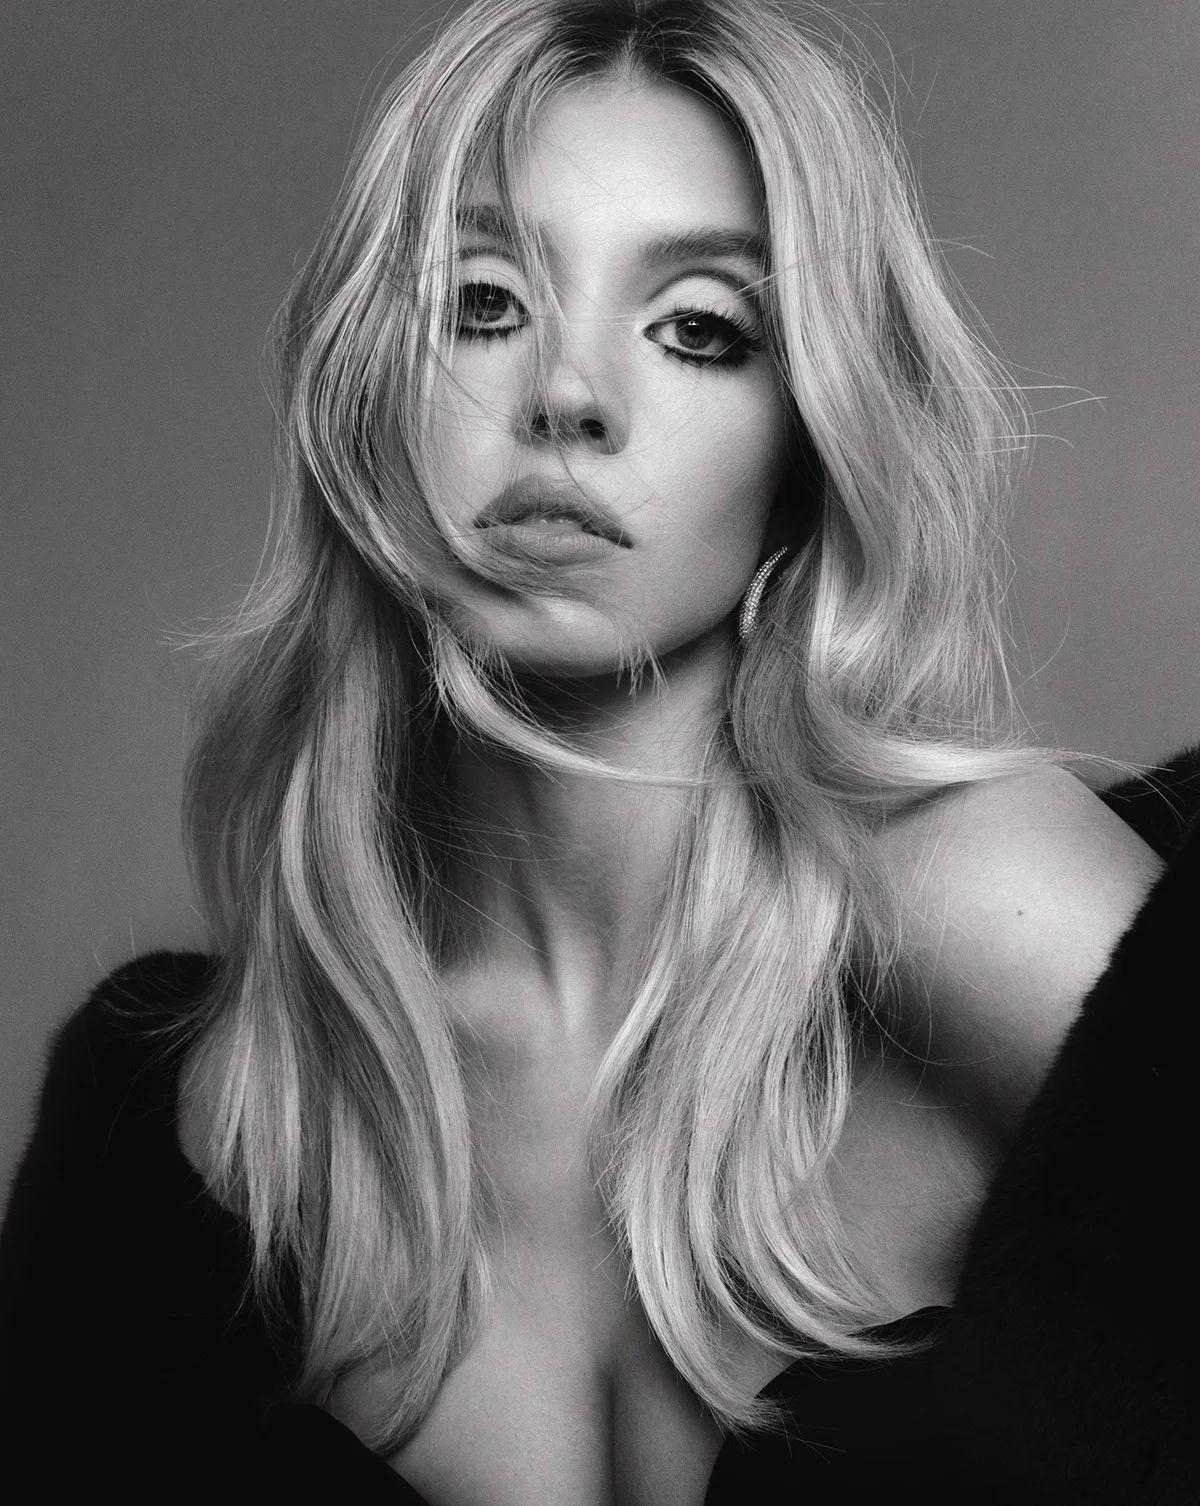 Sydney Sweeney by Elias Tahan for Madame Figaro France April 2022